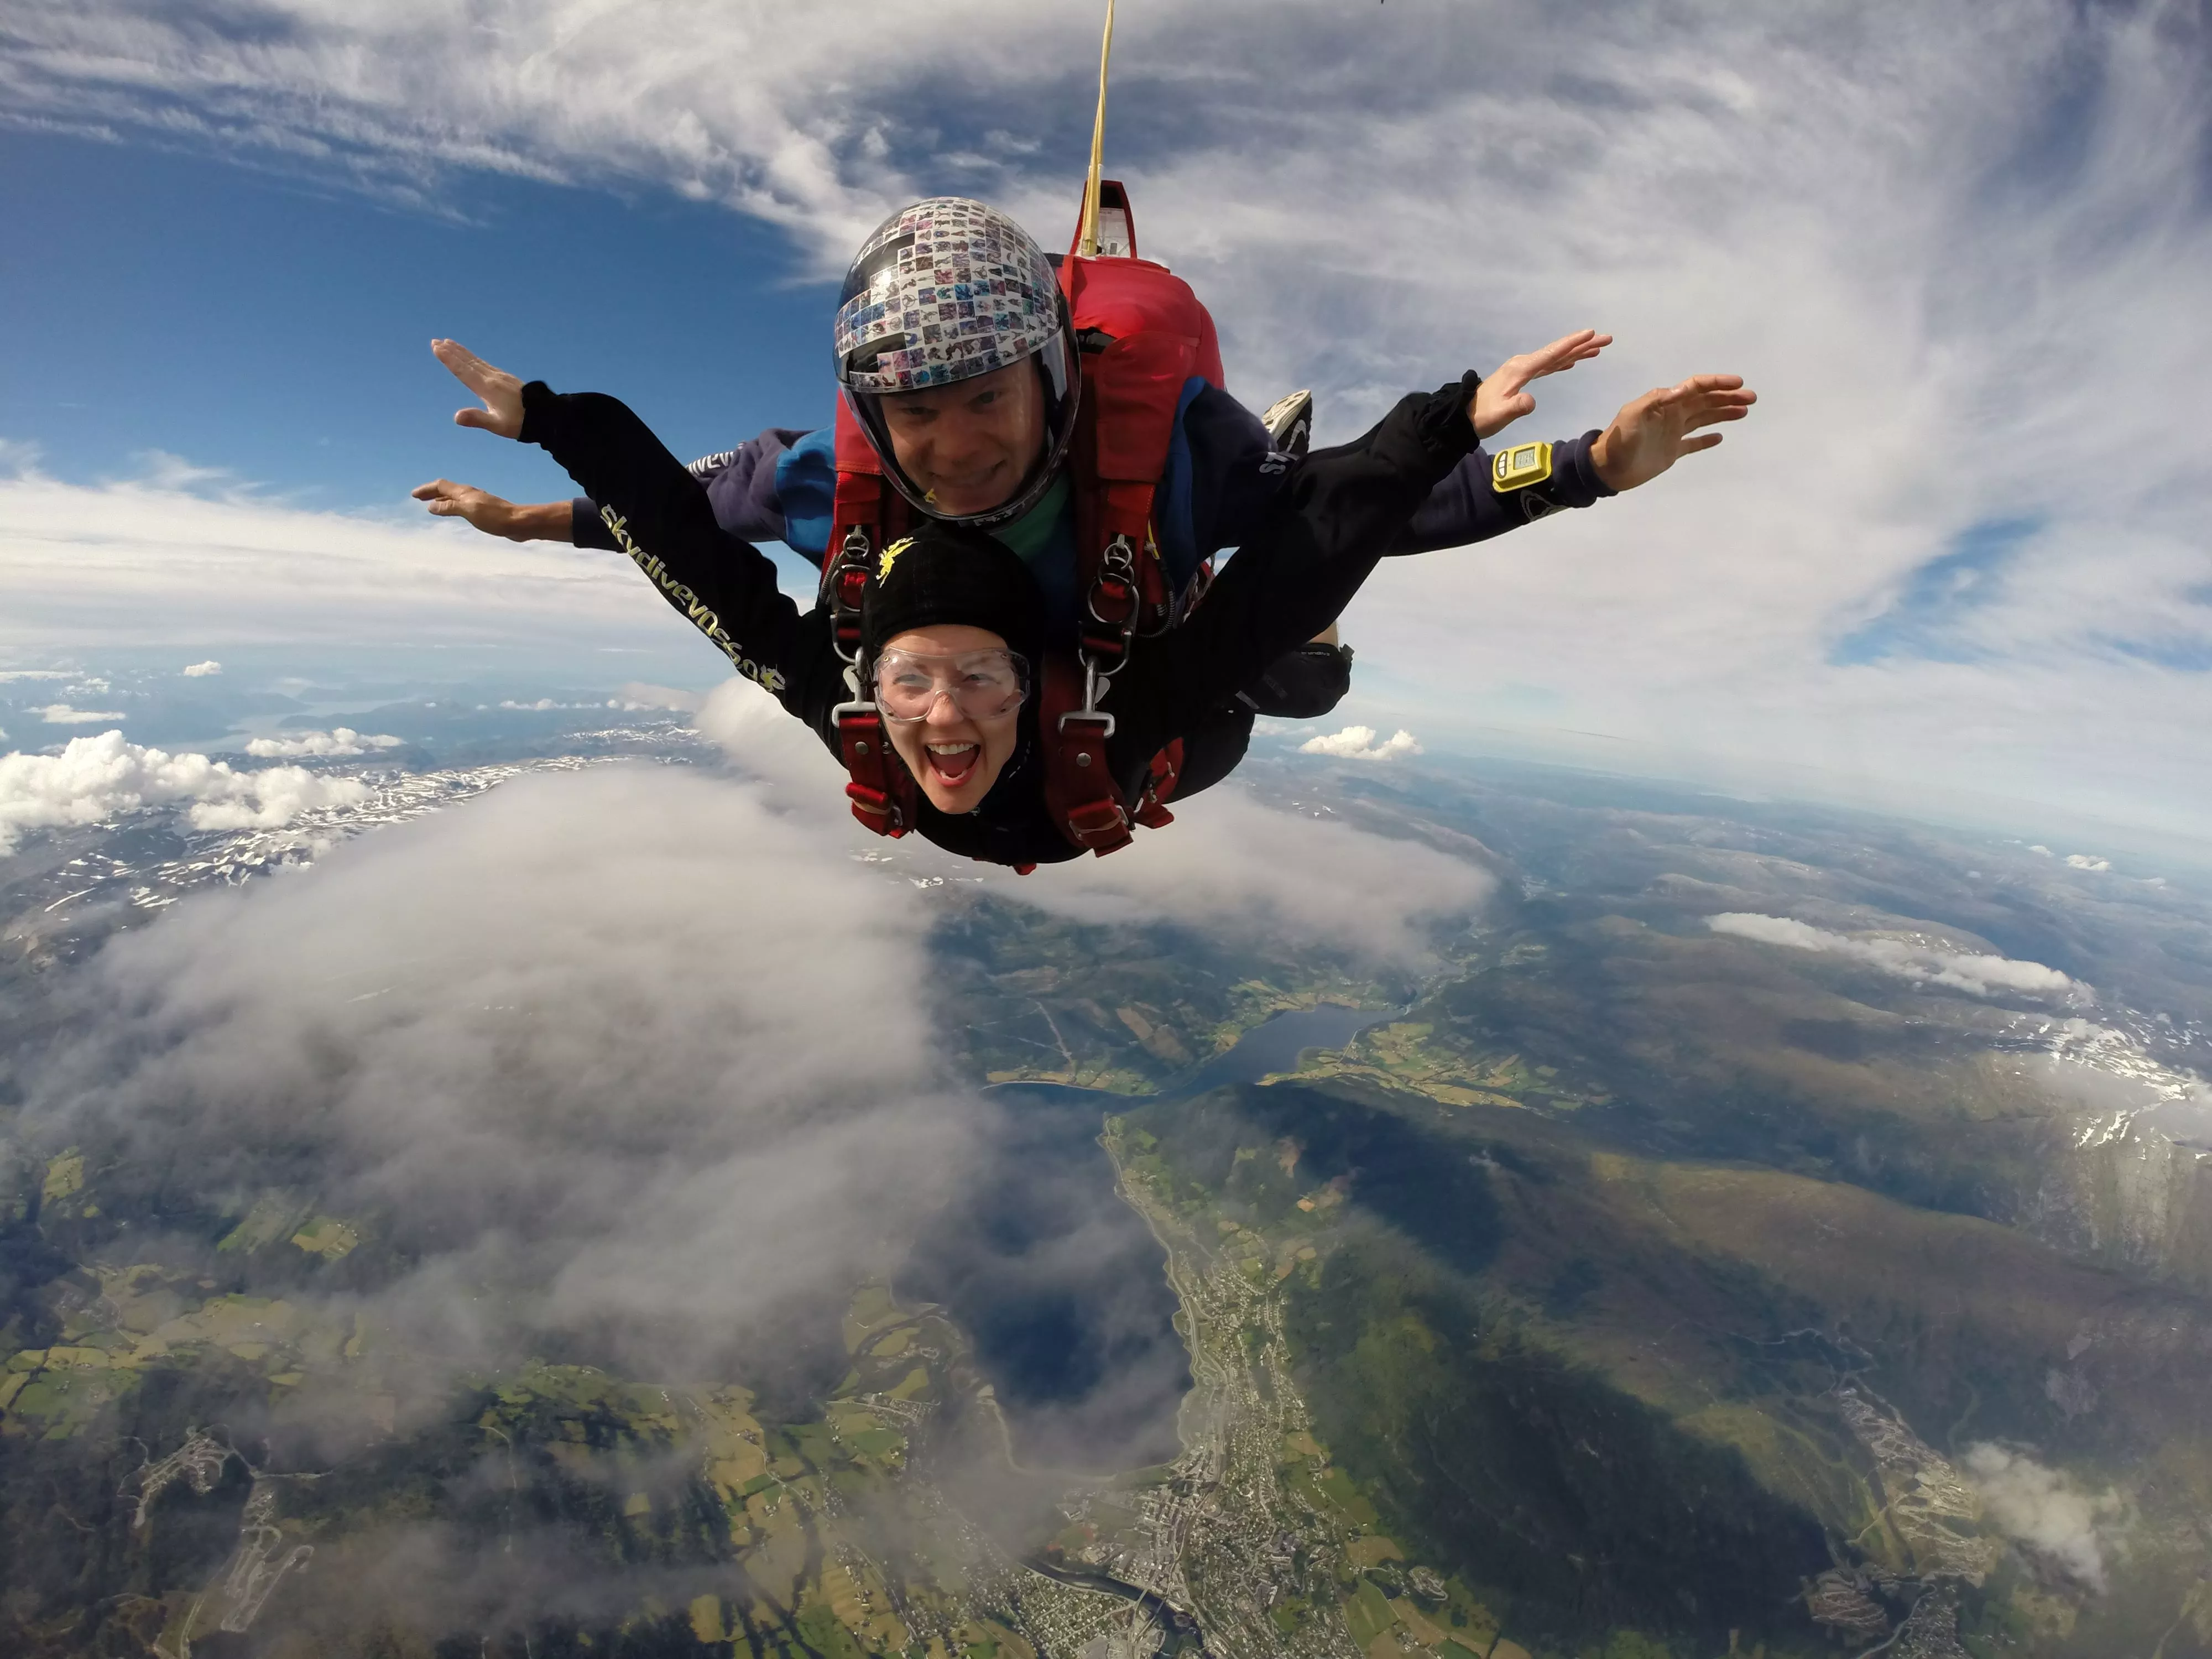 Skydive Voss in Norway, Europe | Skydiving - Rated 1.1